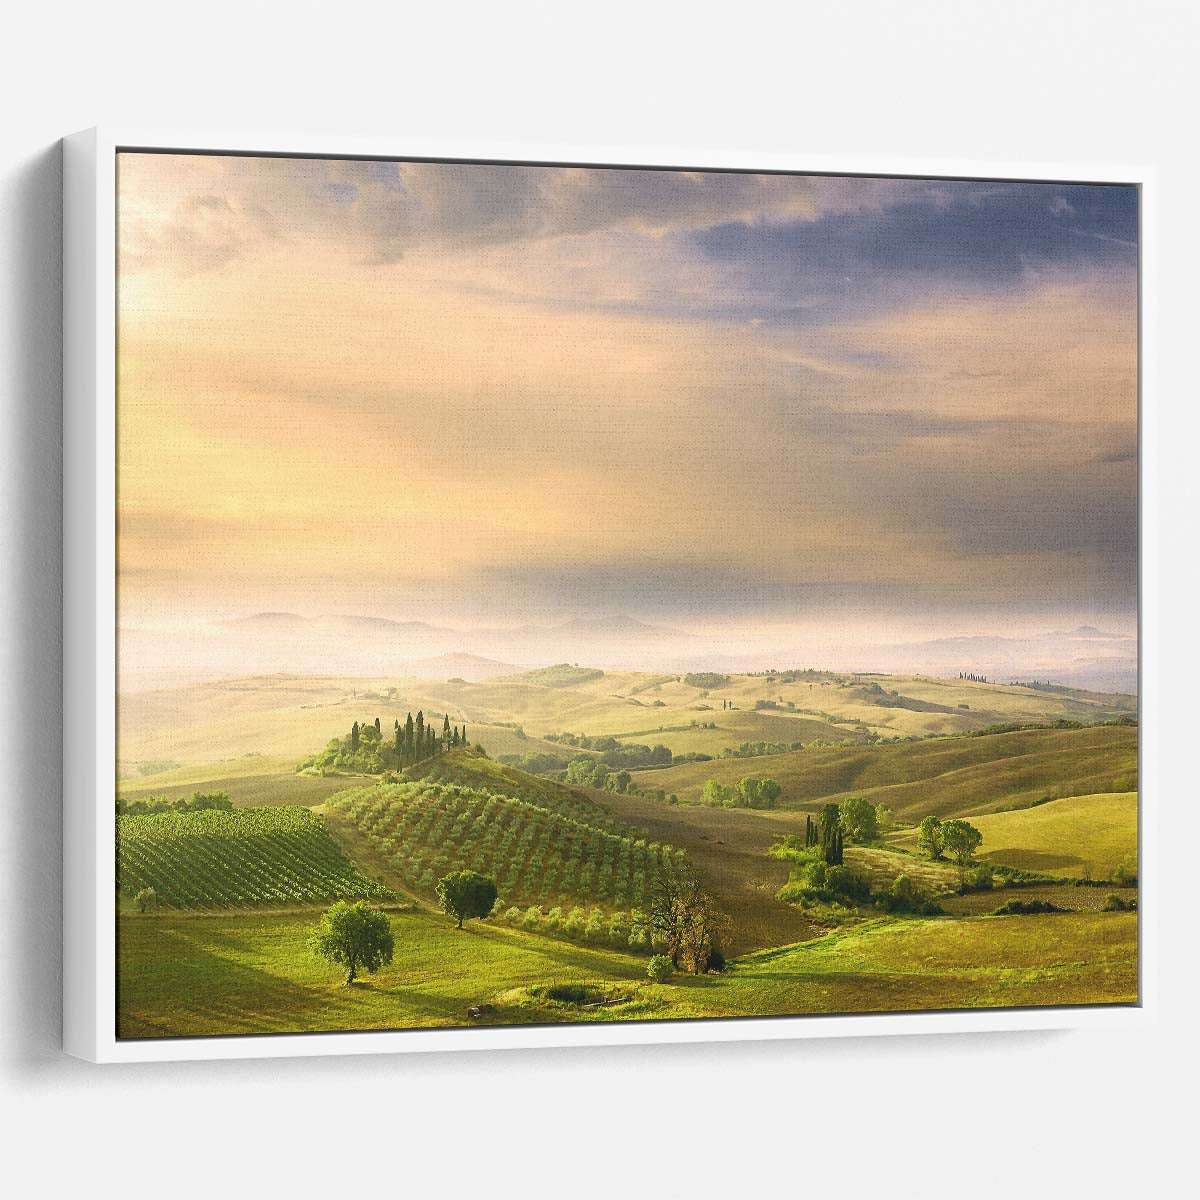 Tuscany Sunrise Lush Hills & Cypress Trees Wall Art by Luxuriance Designs. Made in USA.